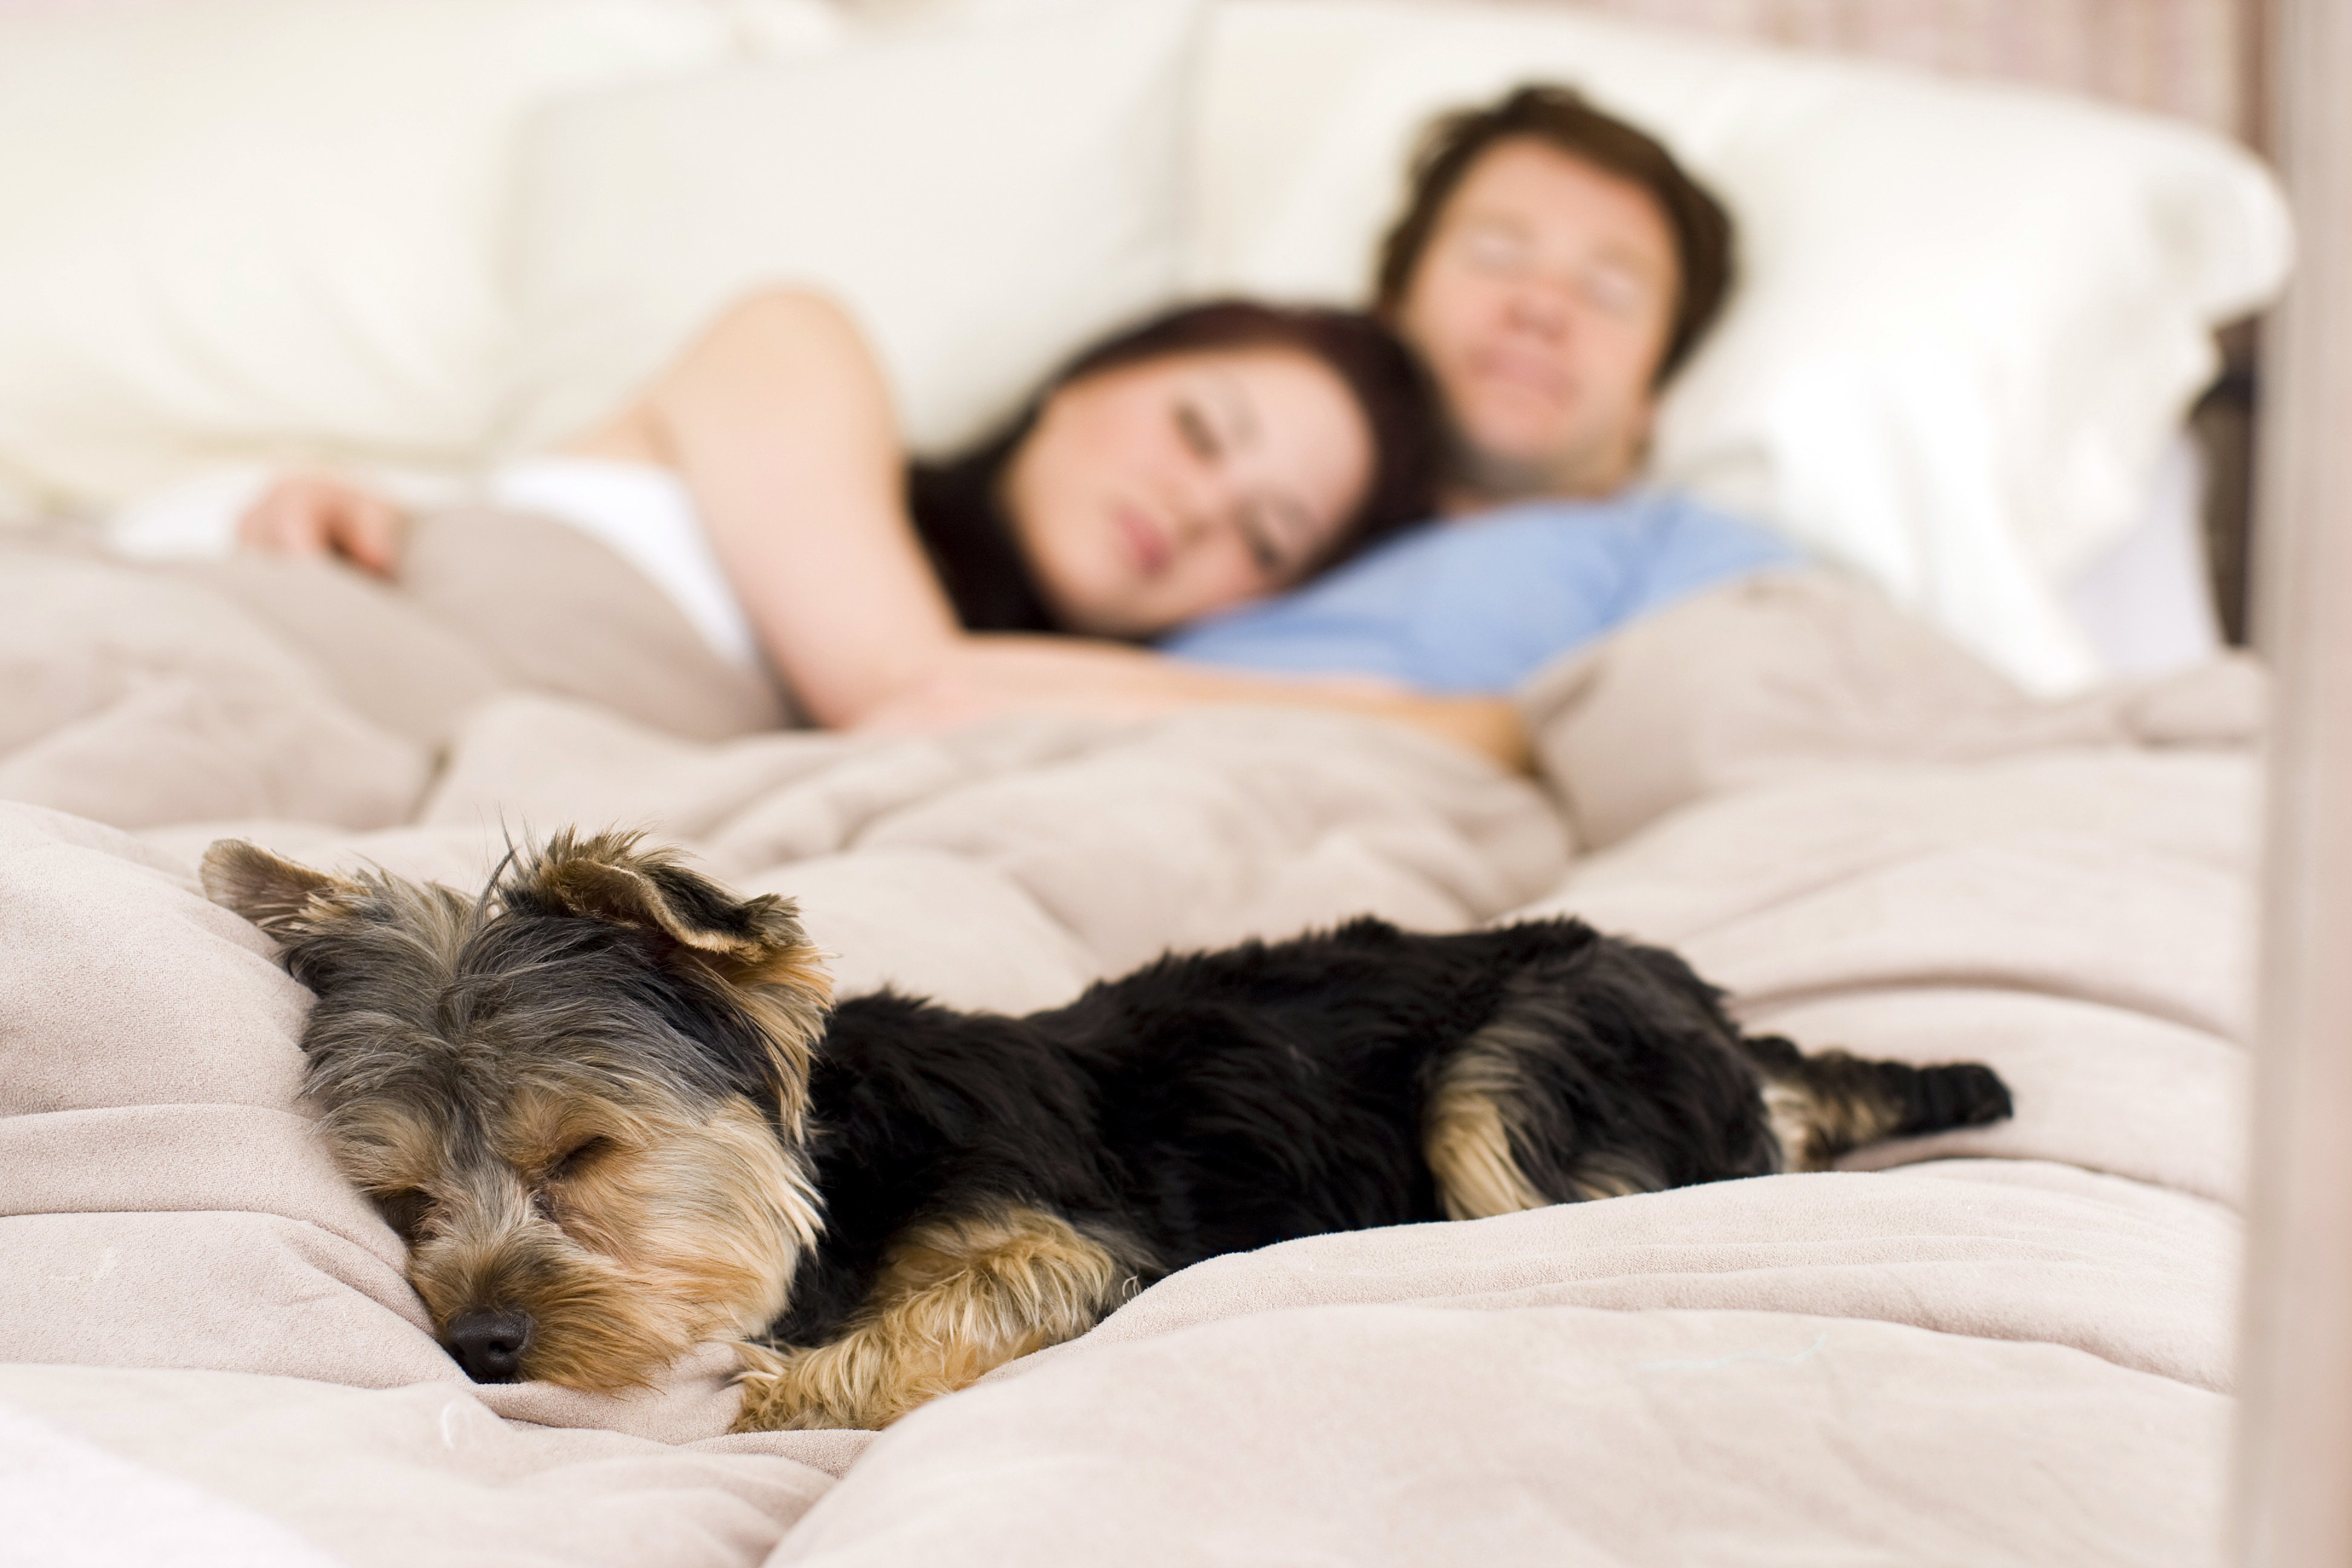 Sleep plays a key role in physical and mental health, and it can be improved, and spoiled, by many things - including your pets. Photo: Shutterstock